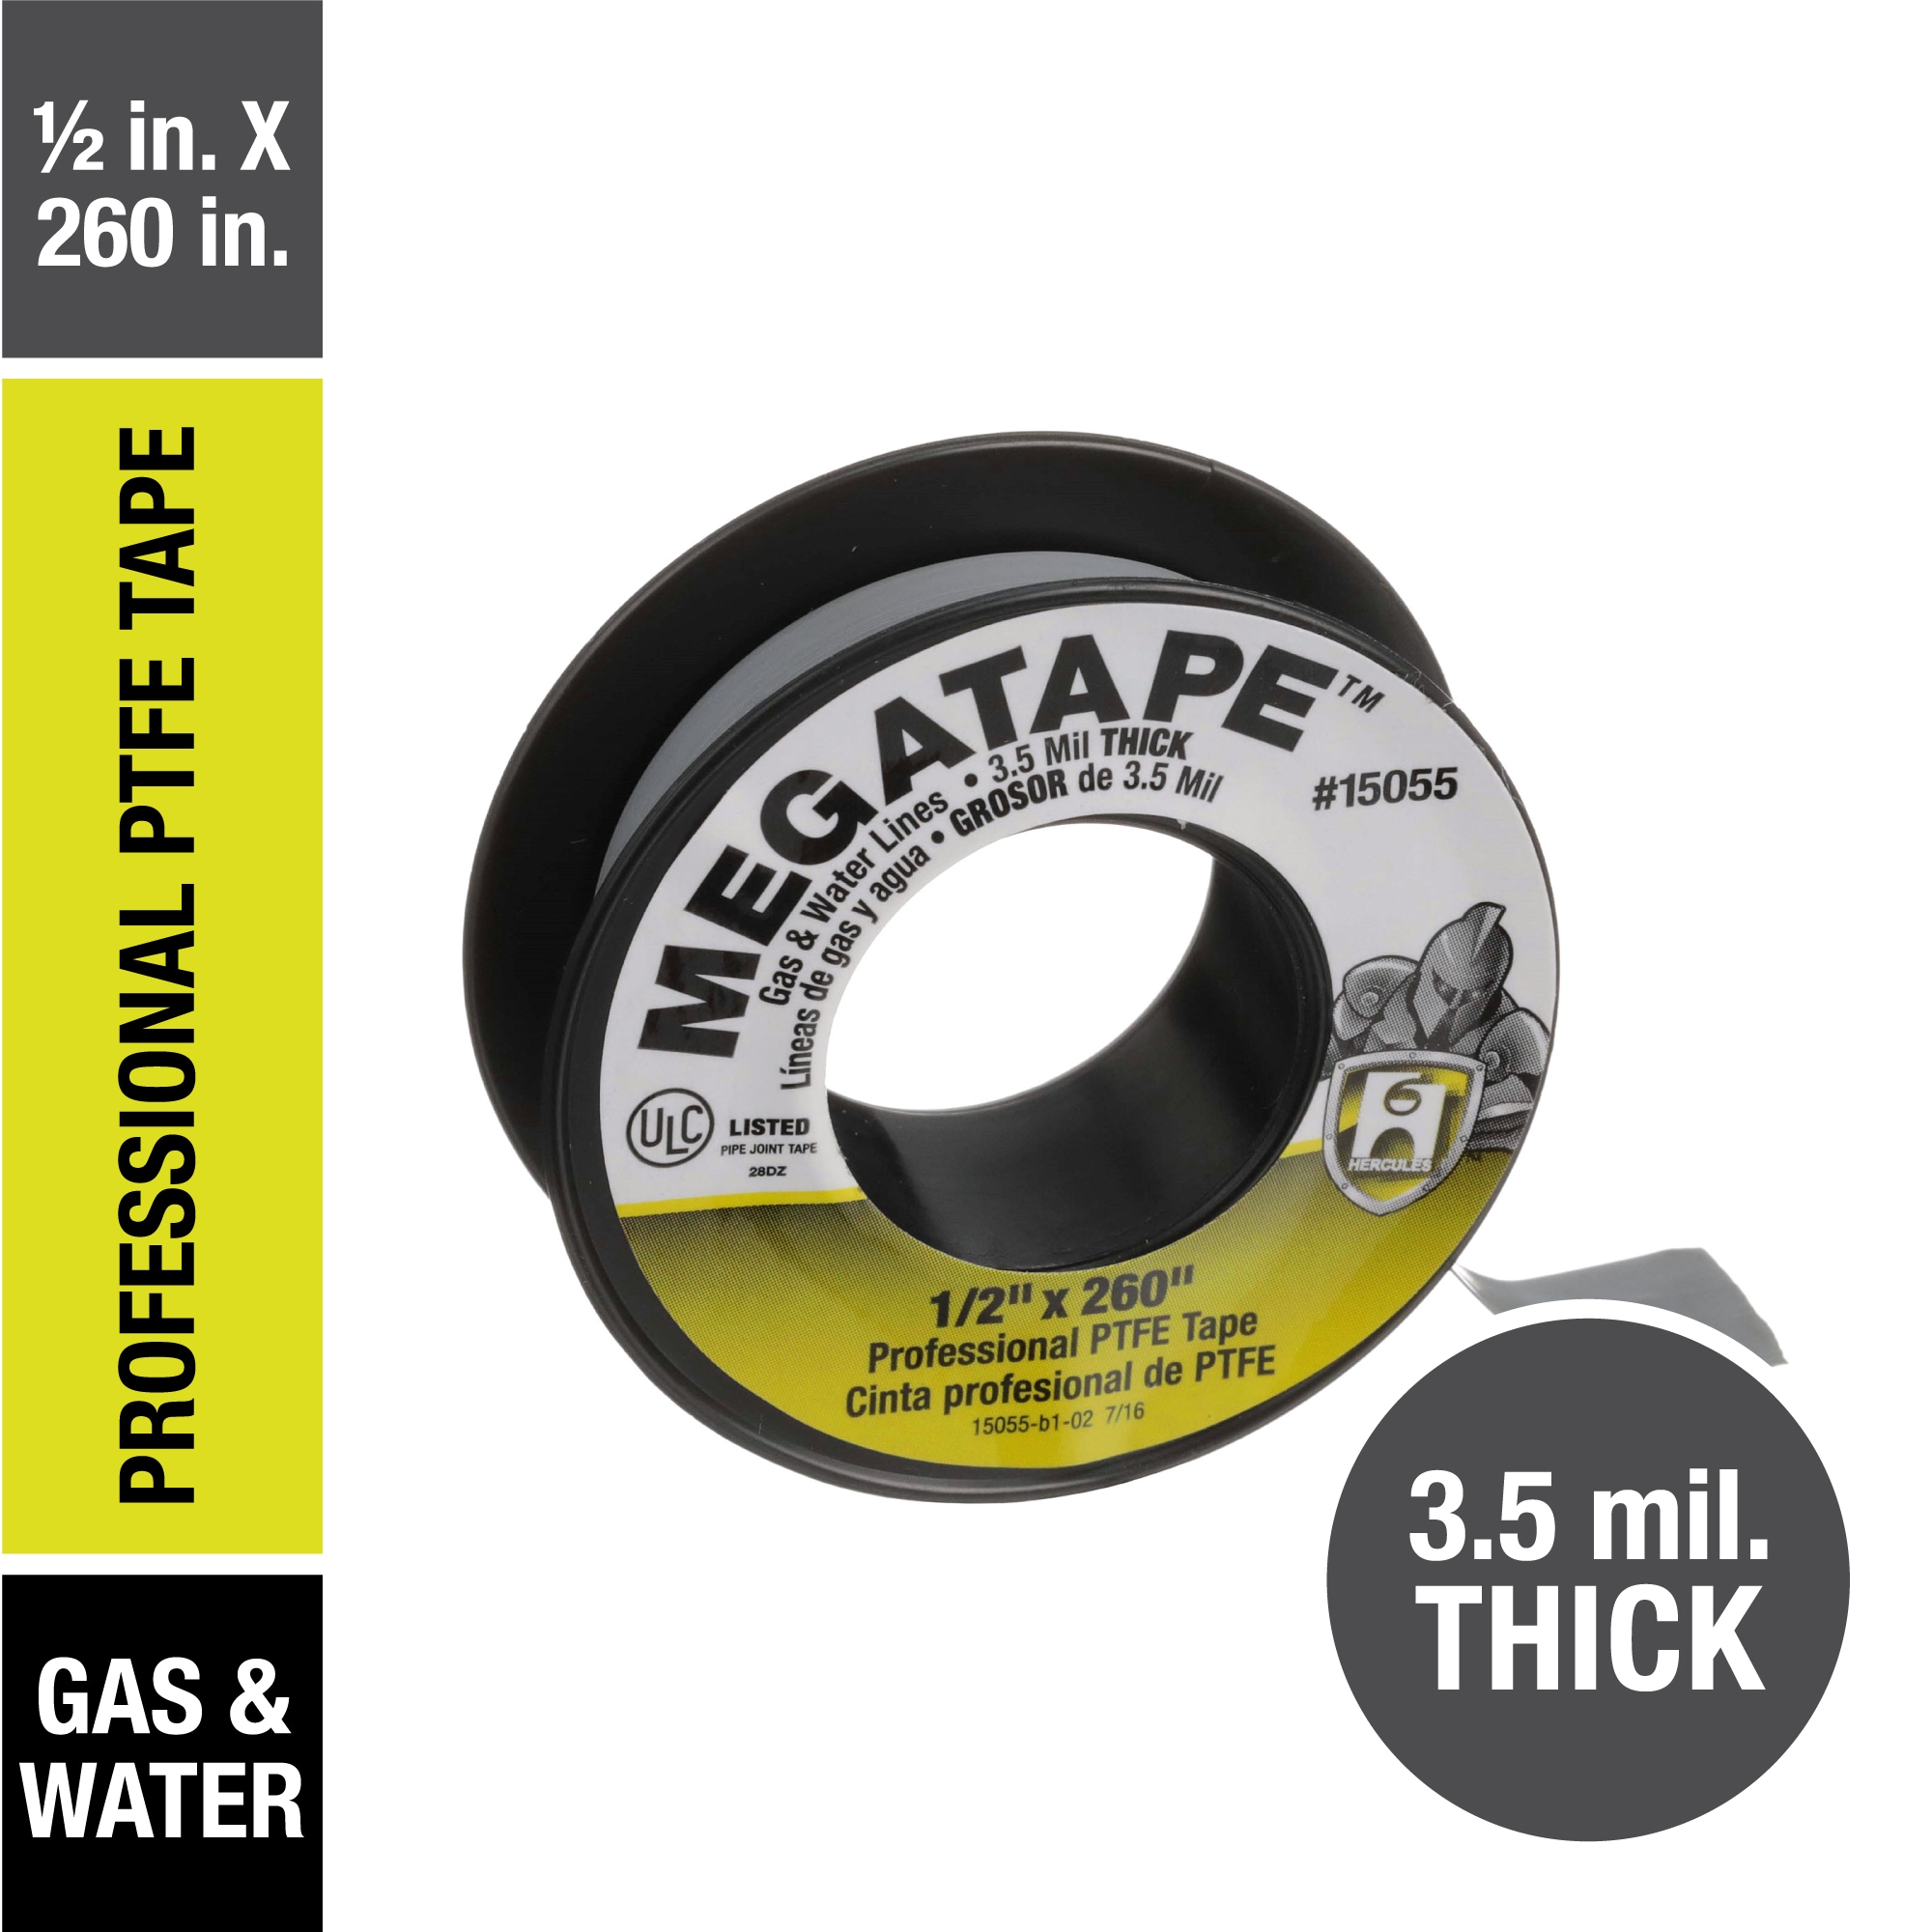 Apt, 10 Mil (2 x 100 ft,) Weatherproof Black PVC Pipe Wrap Tape for Corrosion Protection, Drain Pipe Wrap Tape, Pipe Wrap Insulation Tape for